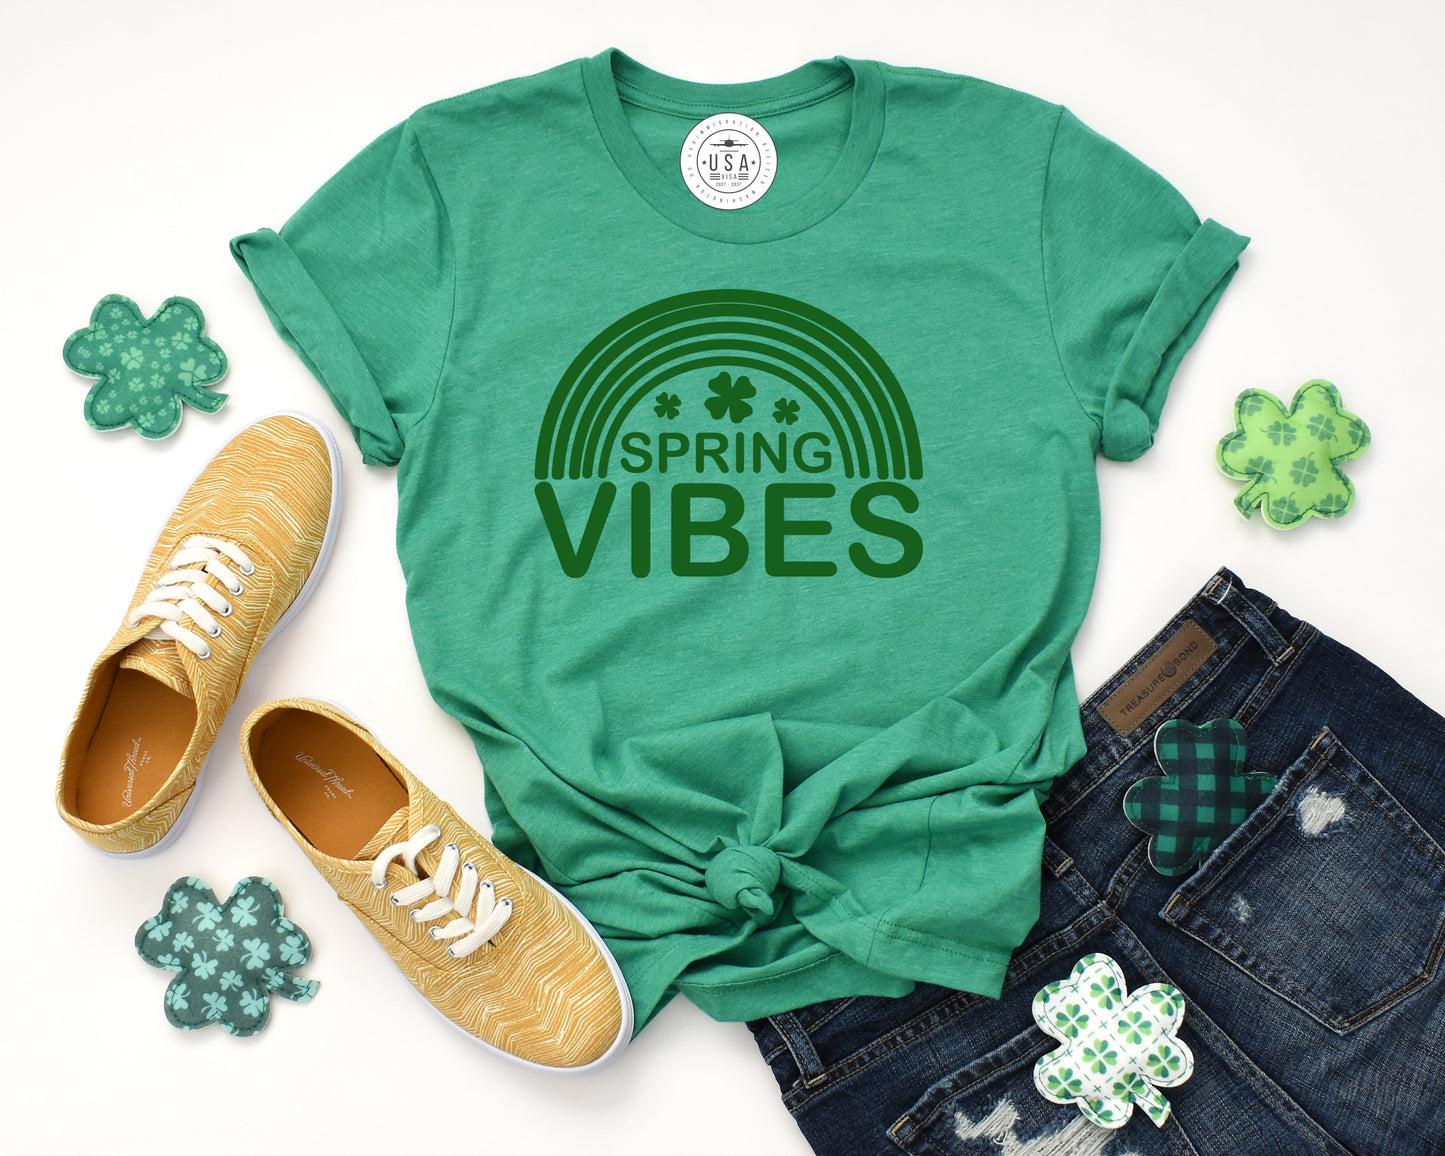 Grit City Rebel VIP Tshirt of the month for February. A aquamarine tshirt with the saying spring vibes in green. Sizes small to 3X unisex fit